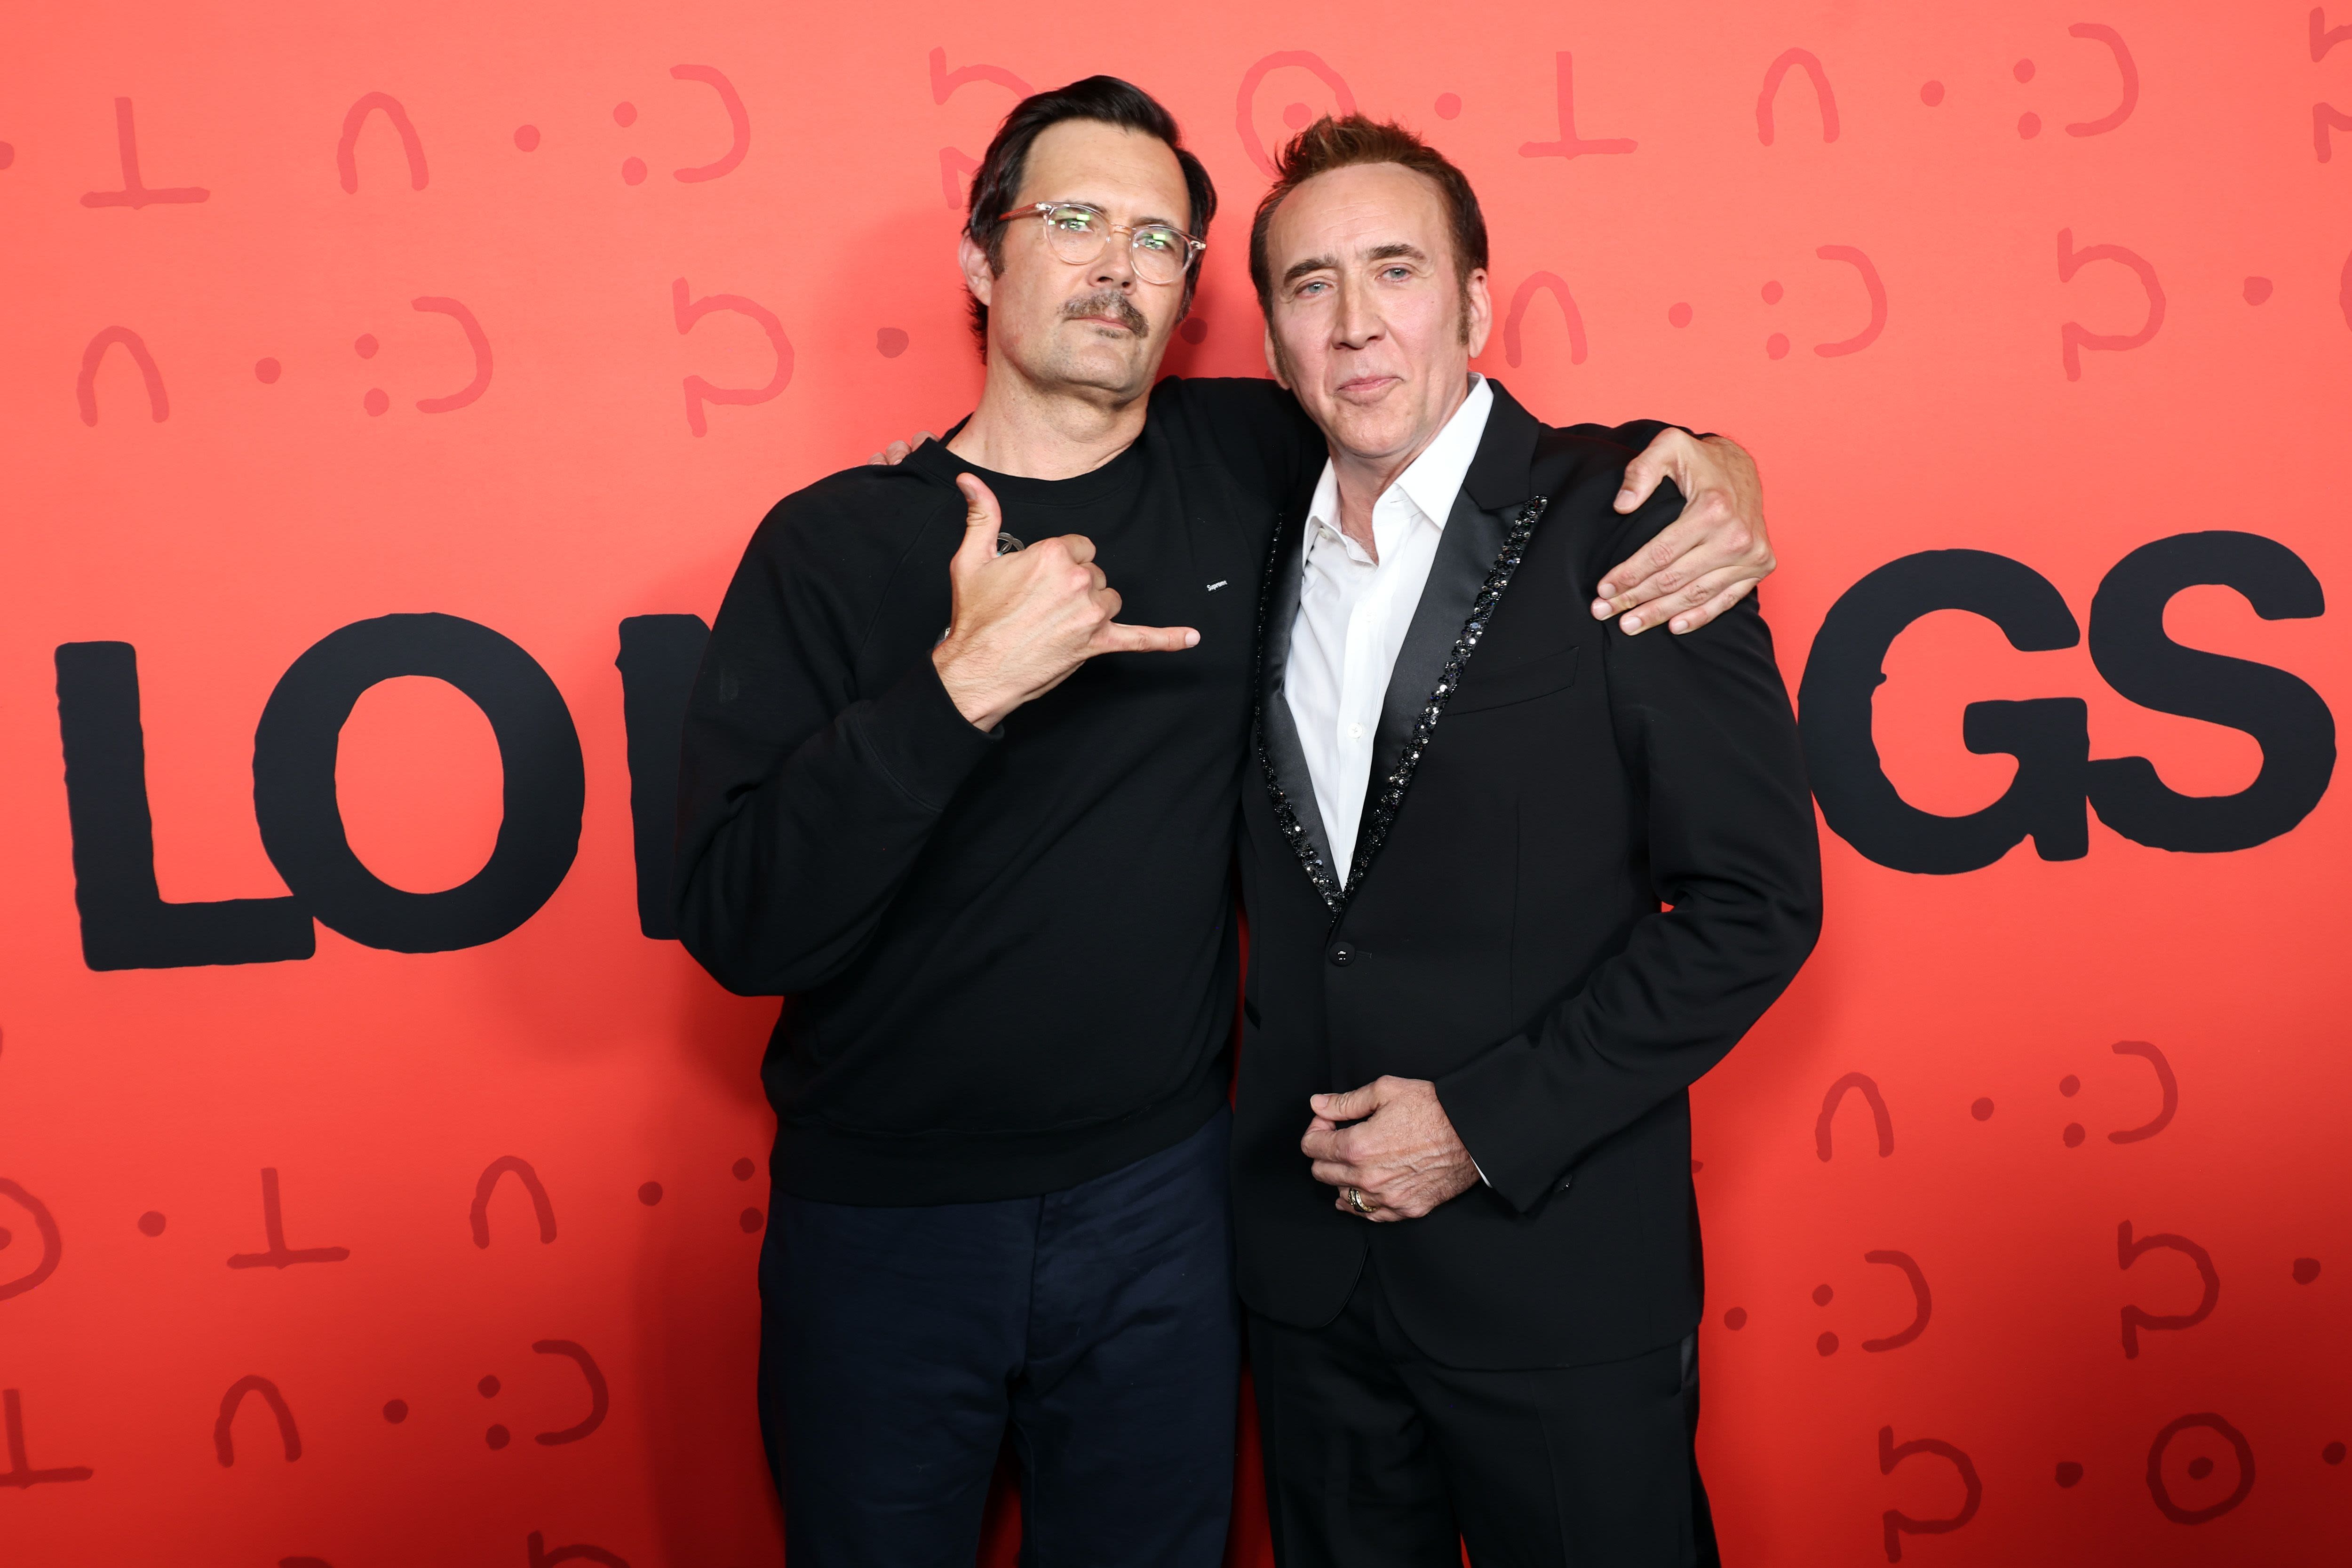 ‘Longlegs’ Director Says Nicolas Cage Stayed “Very Focused” on Character Between Takes But Without “Any Sort of Method...